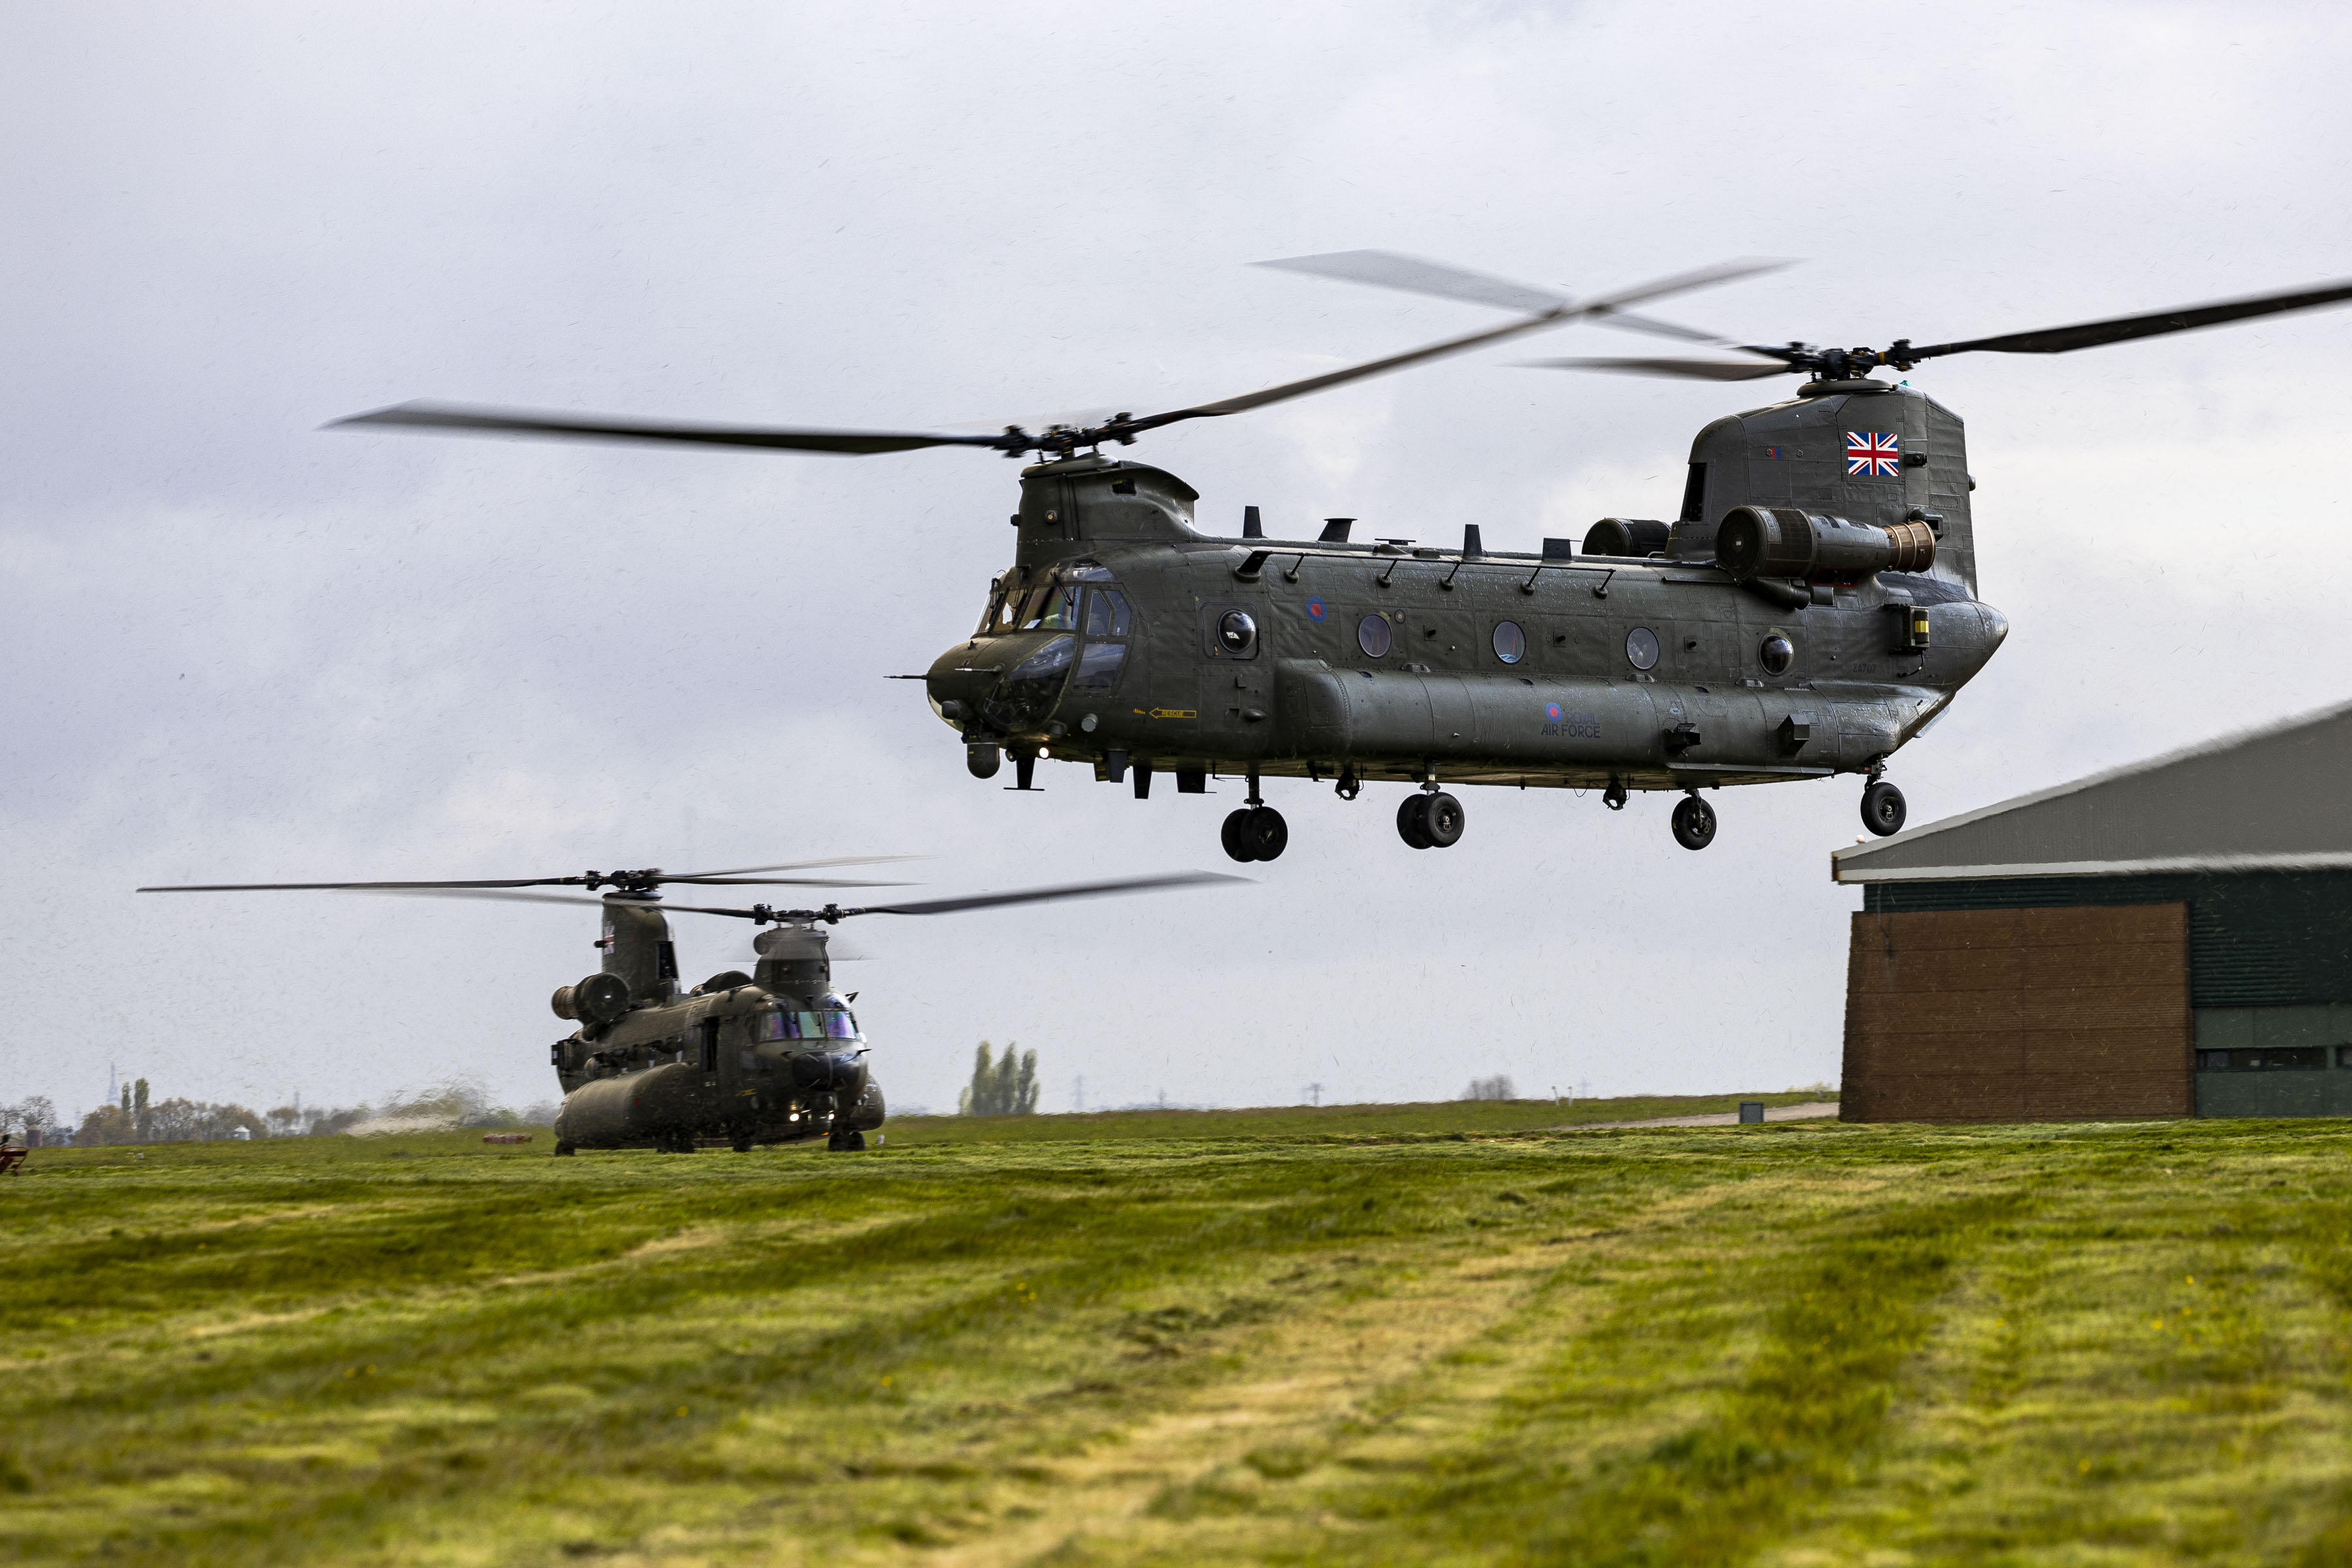 Image shows a Chinook helicopter taking off.